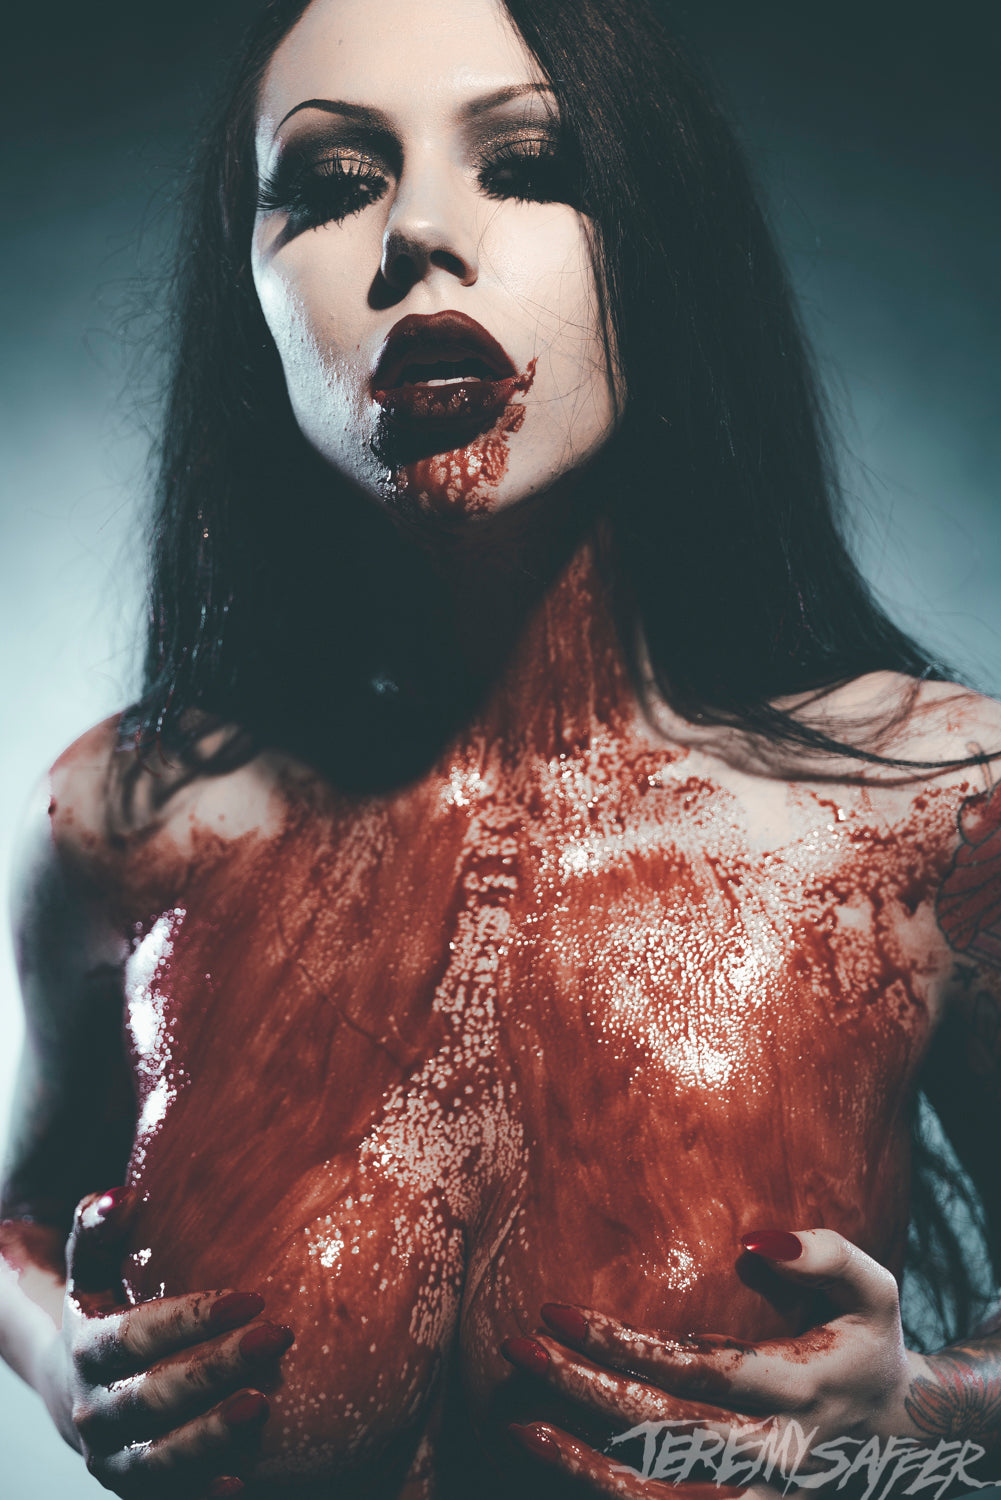 Molly Rennick/Living Dead Girl - Bloodllust 04 - signed limited edition 8x12 metallic print